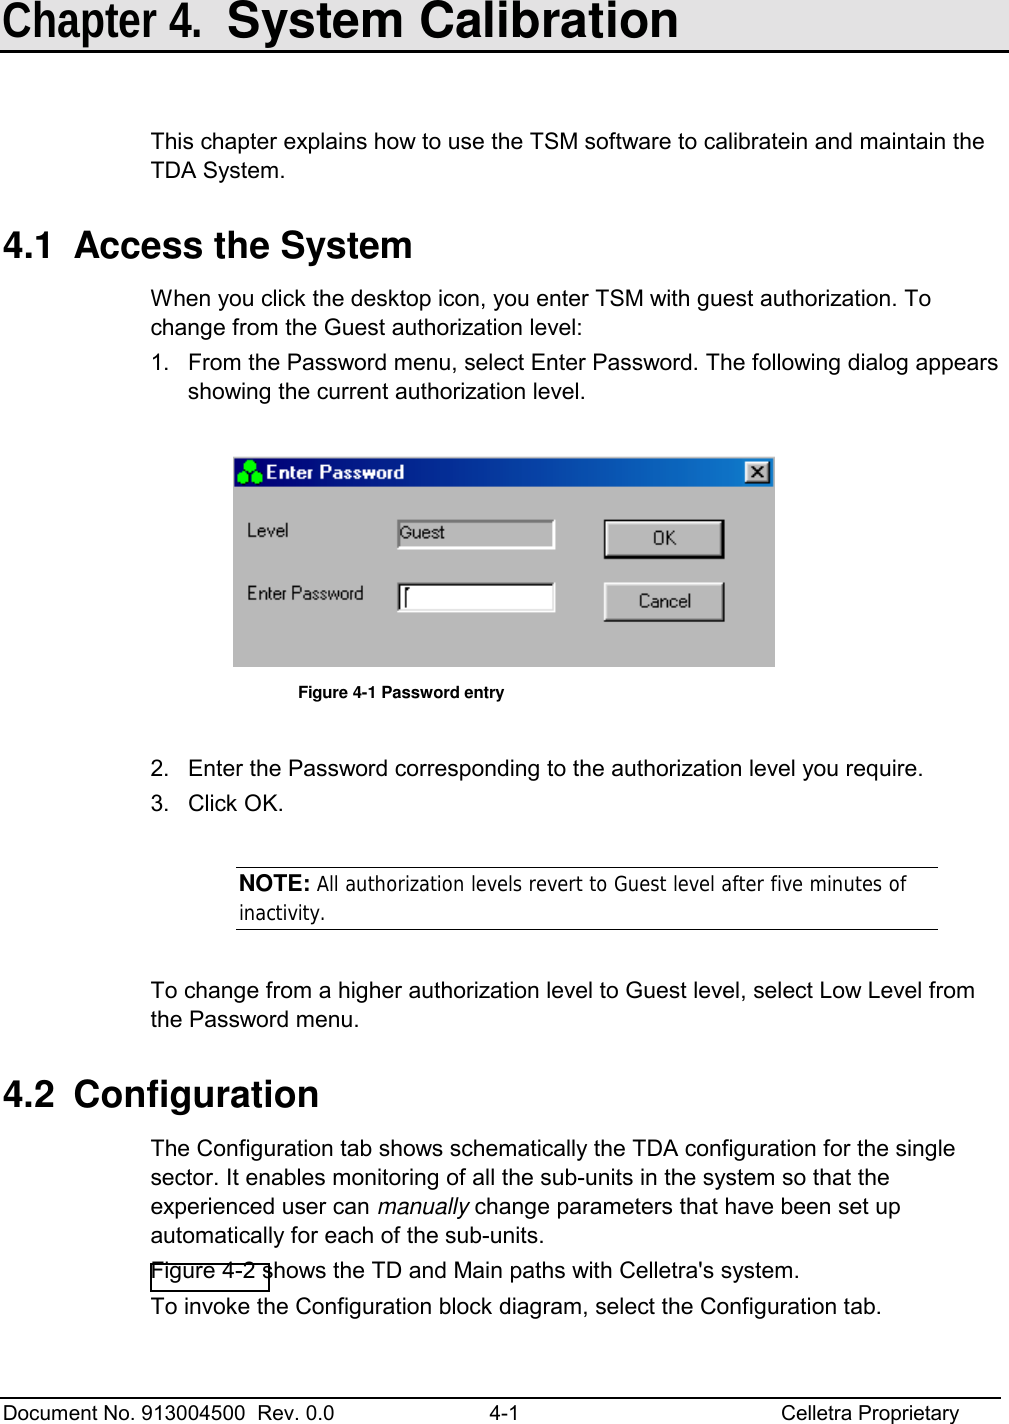  Document No. 913004500  Rev. 0.0  4-1  Celletra Proprietary   Chapter 4.  System Calibration  This chapter explains how to use the TSM software to calibratein and maintain the TDA System. 4.1  Access the System When you click the desktop icon, you enter TSM with guest authorization. To change from the Guest authorization level: 1.  From the Password menu, select Enter Password. The following dialog appears showing the current authorization level.   Figure  4-1 Password entry  2.  Enter the Password corresponding to the authorization level you require. 3. Click OK.  NOTE: All authorization levels revert to Guest level after five minutes of inactivity.  To change from a higher authorization level to Guest level, select Low Level from the Password menu. 4.2 Configuration The Configuration tab shows schematically the TDA configuration for the single sector. It enables monitoring of all the sub-units in the system so that the experienced user can manually change parameters that have been set up automatically for each of the sub-units.  Figure  4-2 shows the TD and Main paths with Celletra&apos;s system. To invoke the Configuration block diagram, select the Configuration tab.   